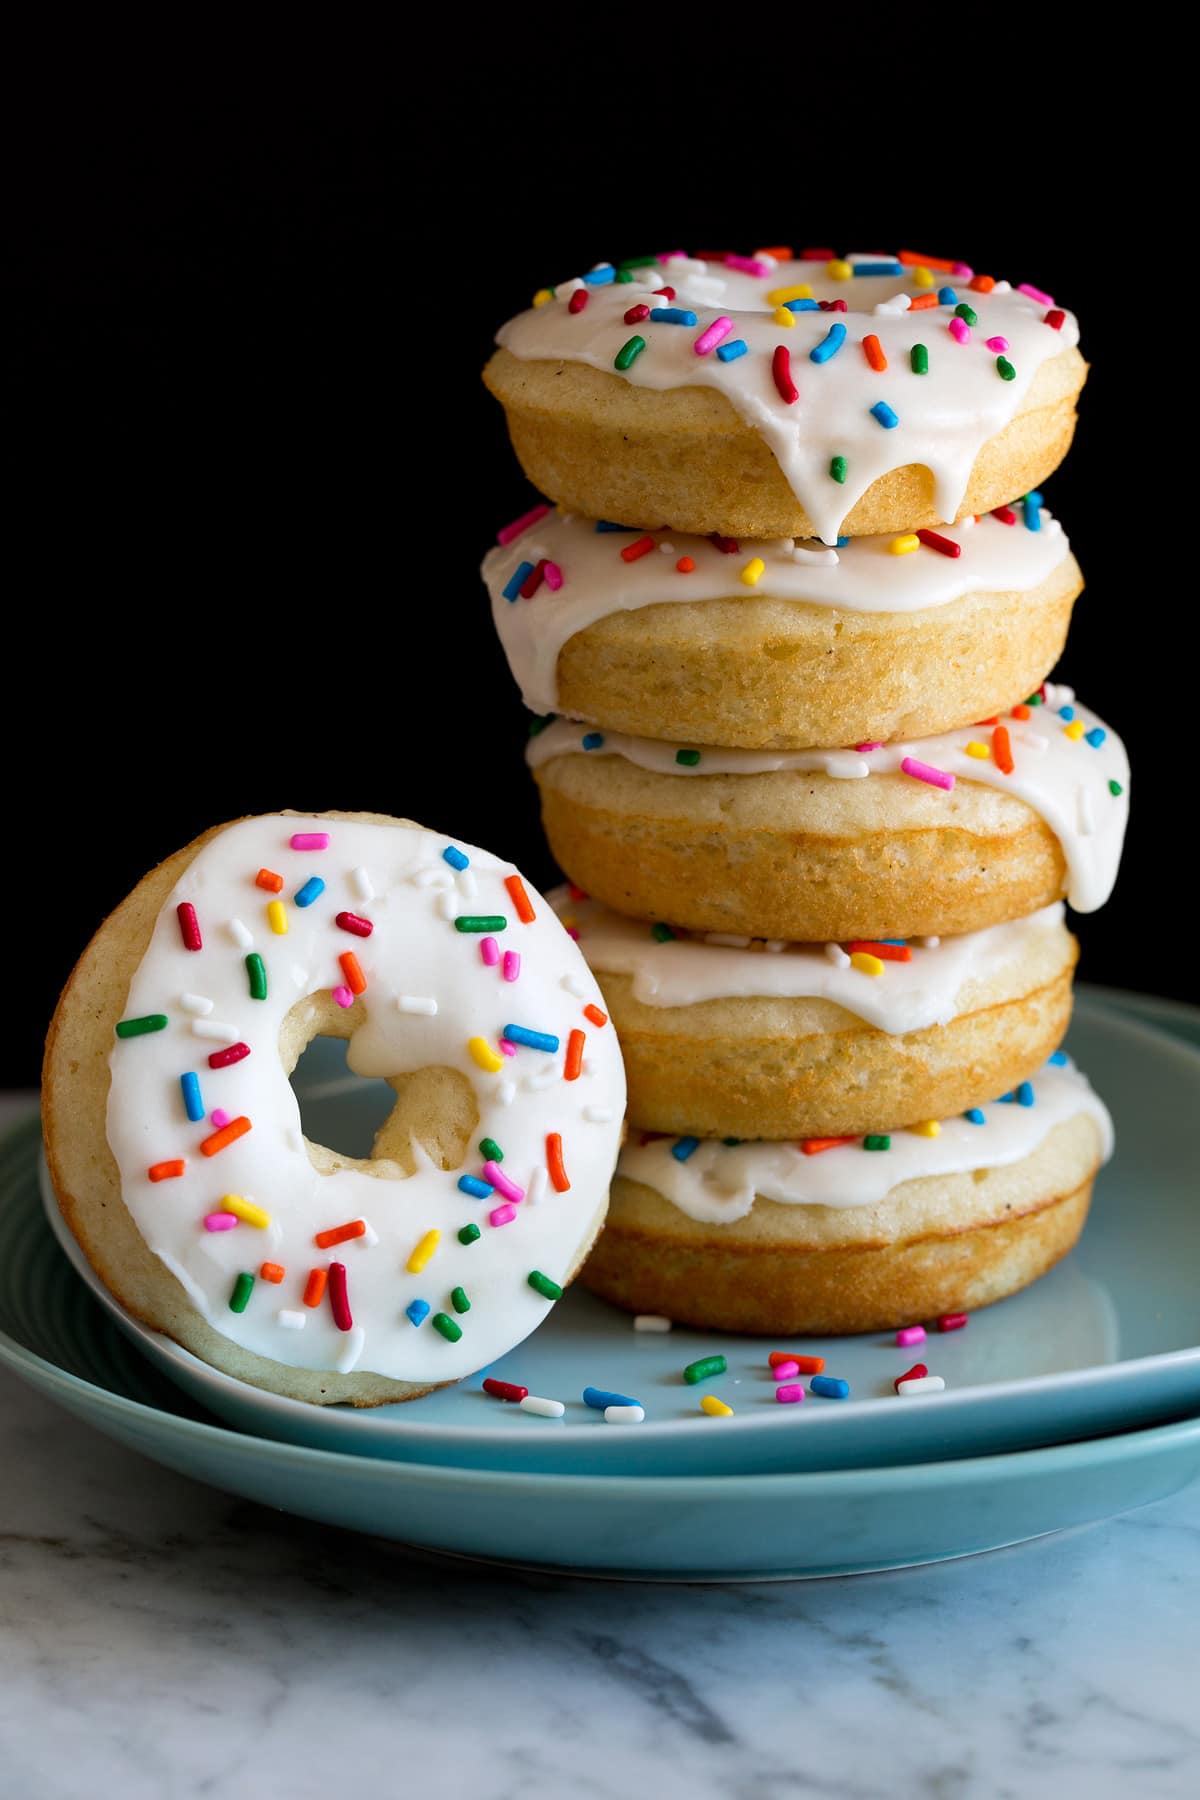 Image of stack of baked donuts on a plate. They are covered in icing and sprinkles.